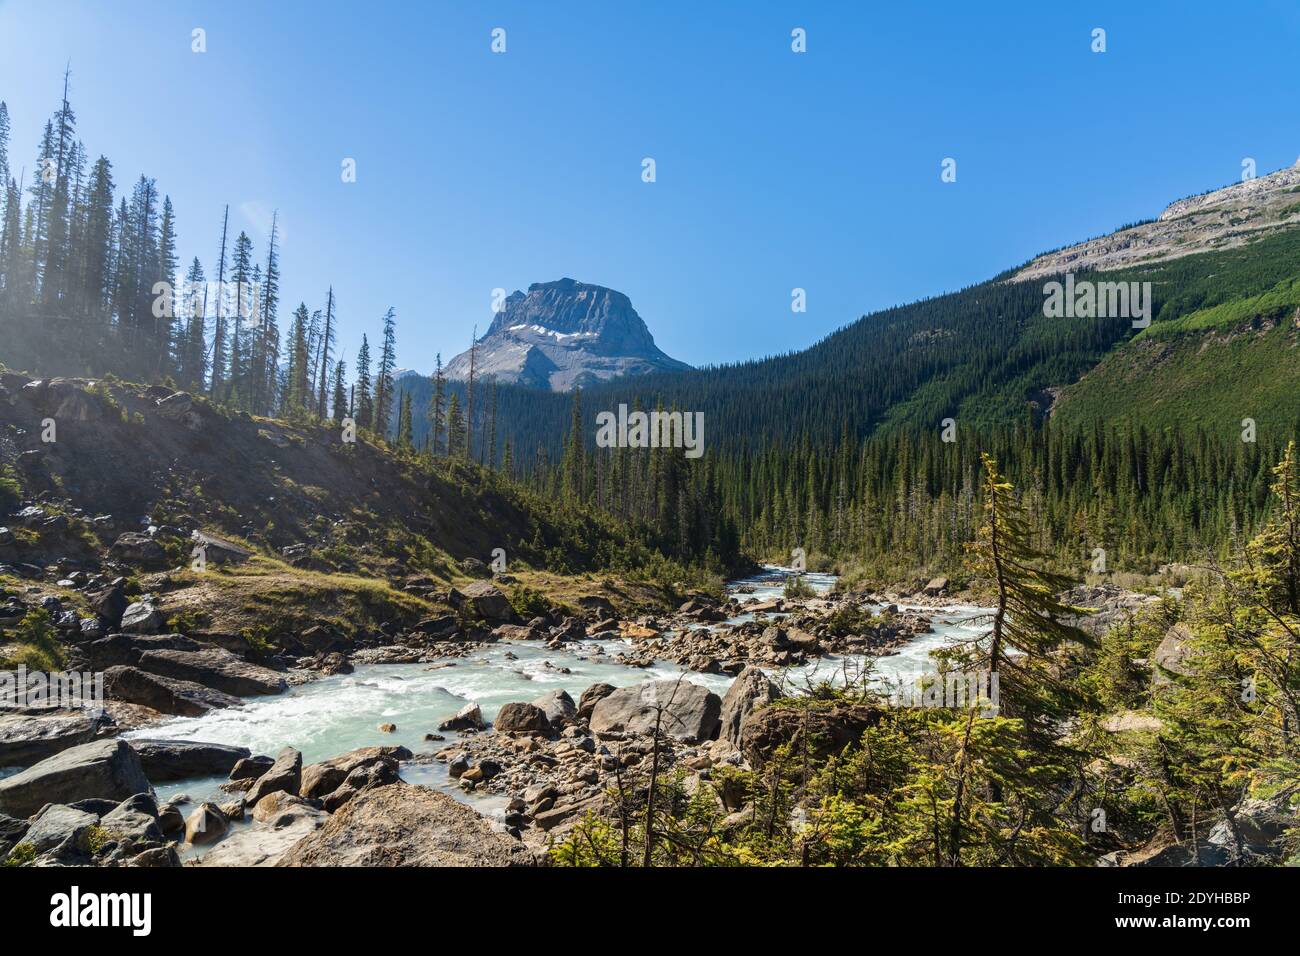 Glacier-fed waters from Takakkaw Falls flow into Yoho River with Wapta Mountain in background in a summer day. Yoho National Park, Canadian Rockies Stock Photo